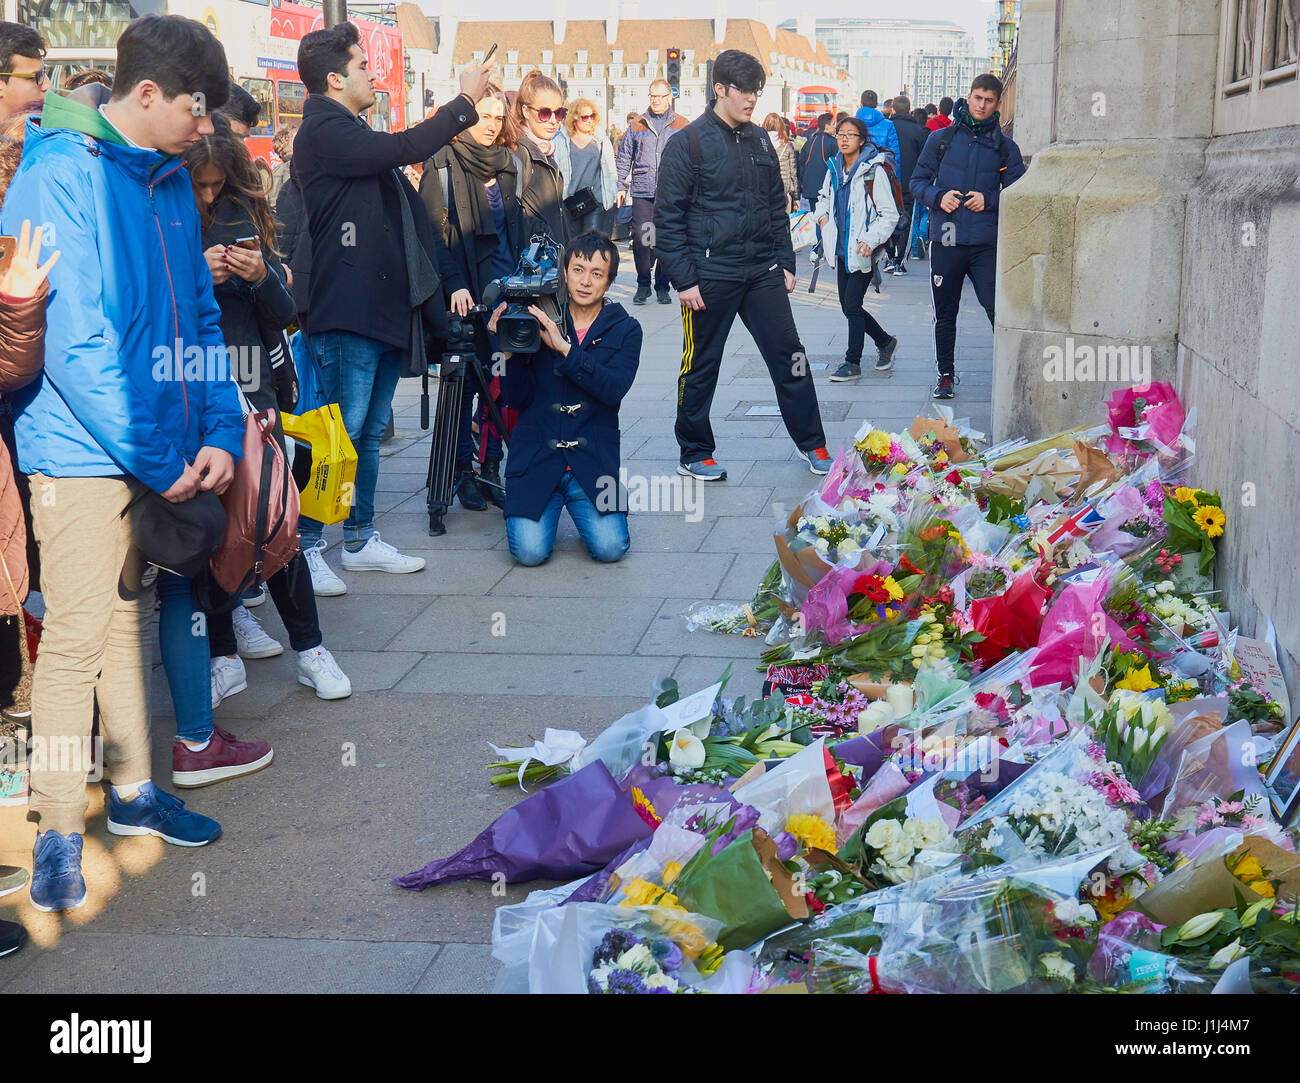 Tourists and a cameraman looking at flowers and tributes to victims of the Westminster terrorist attack, London, England Stock Photo